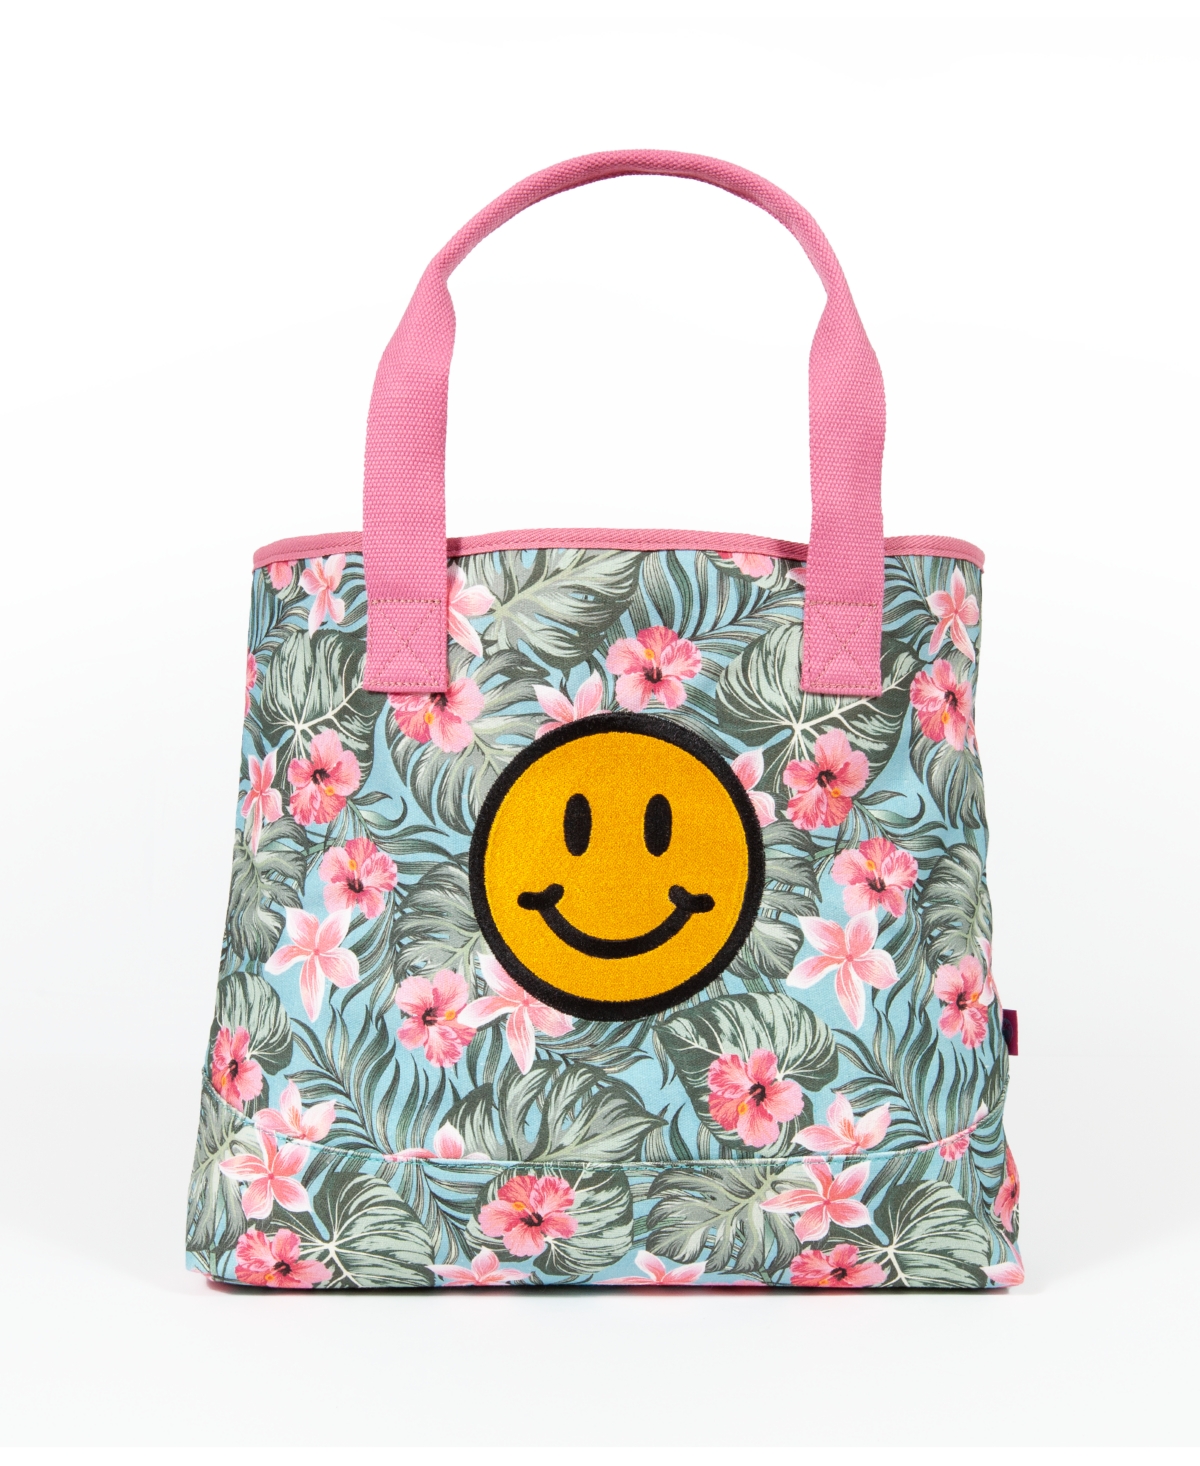 Hawaiian Extra Large, 100% Cotton Canvas Carryall Tote Bag - Multi